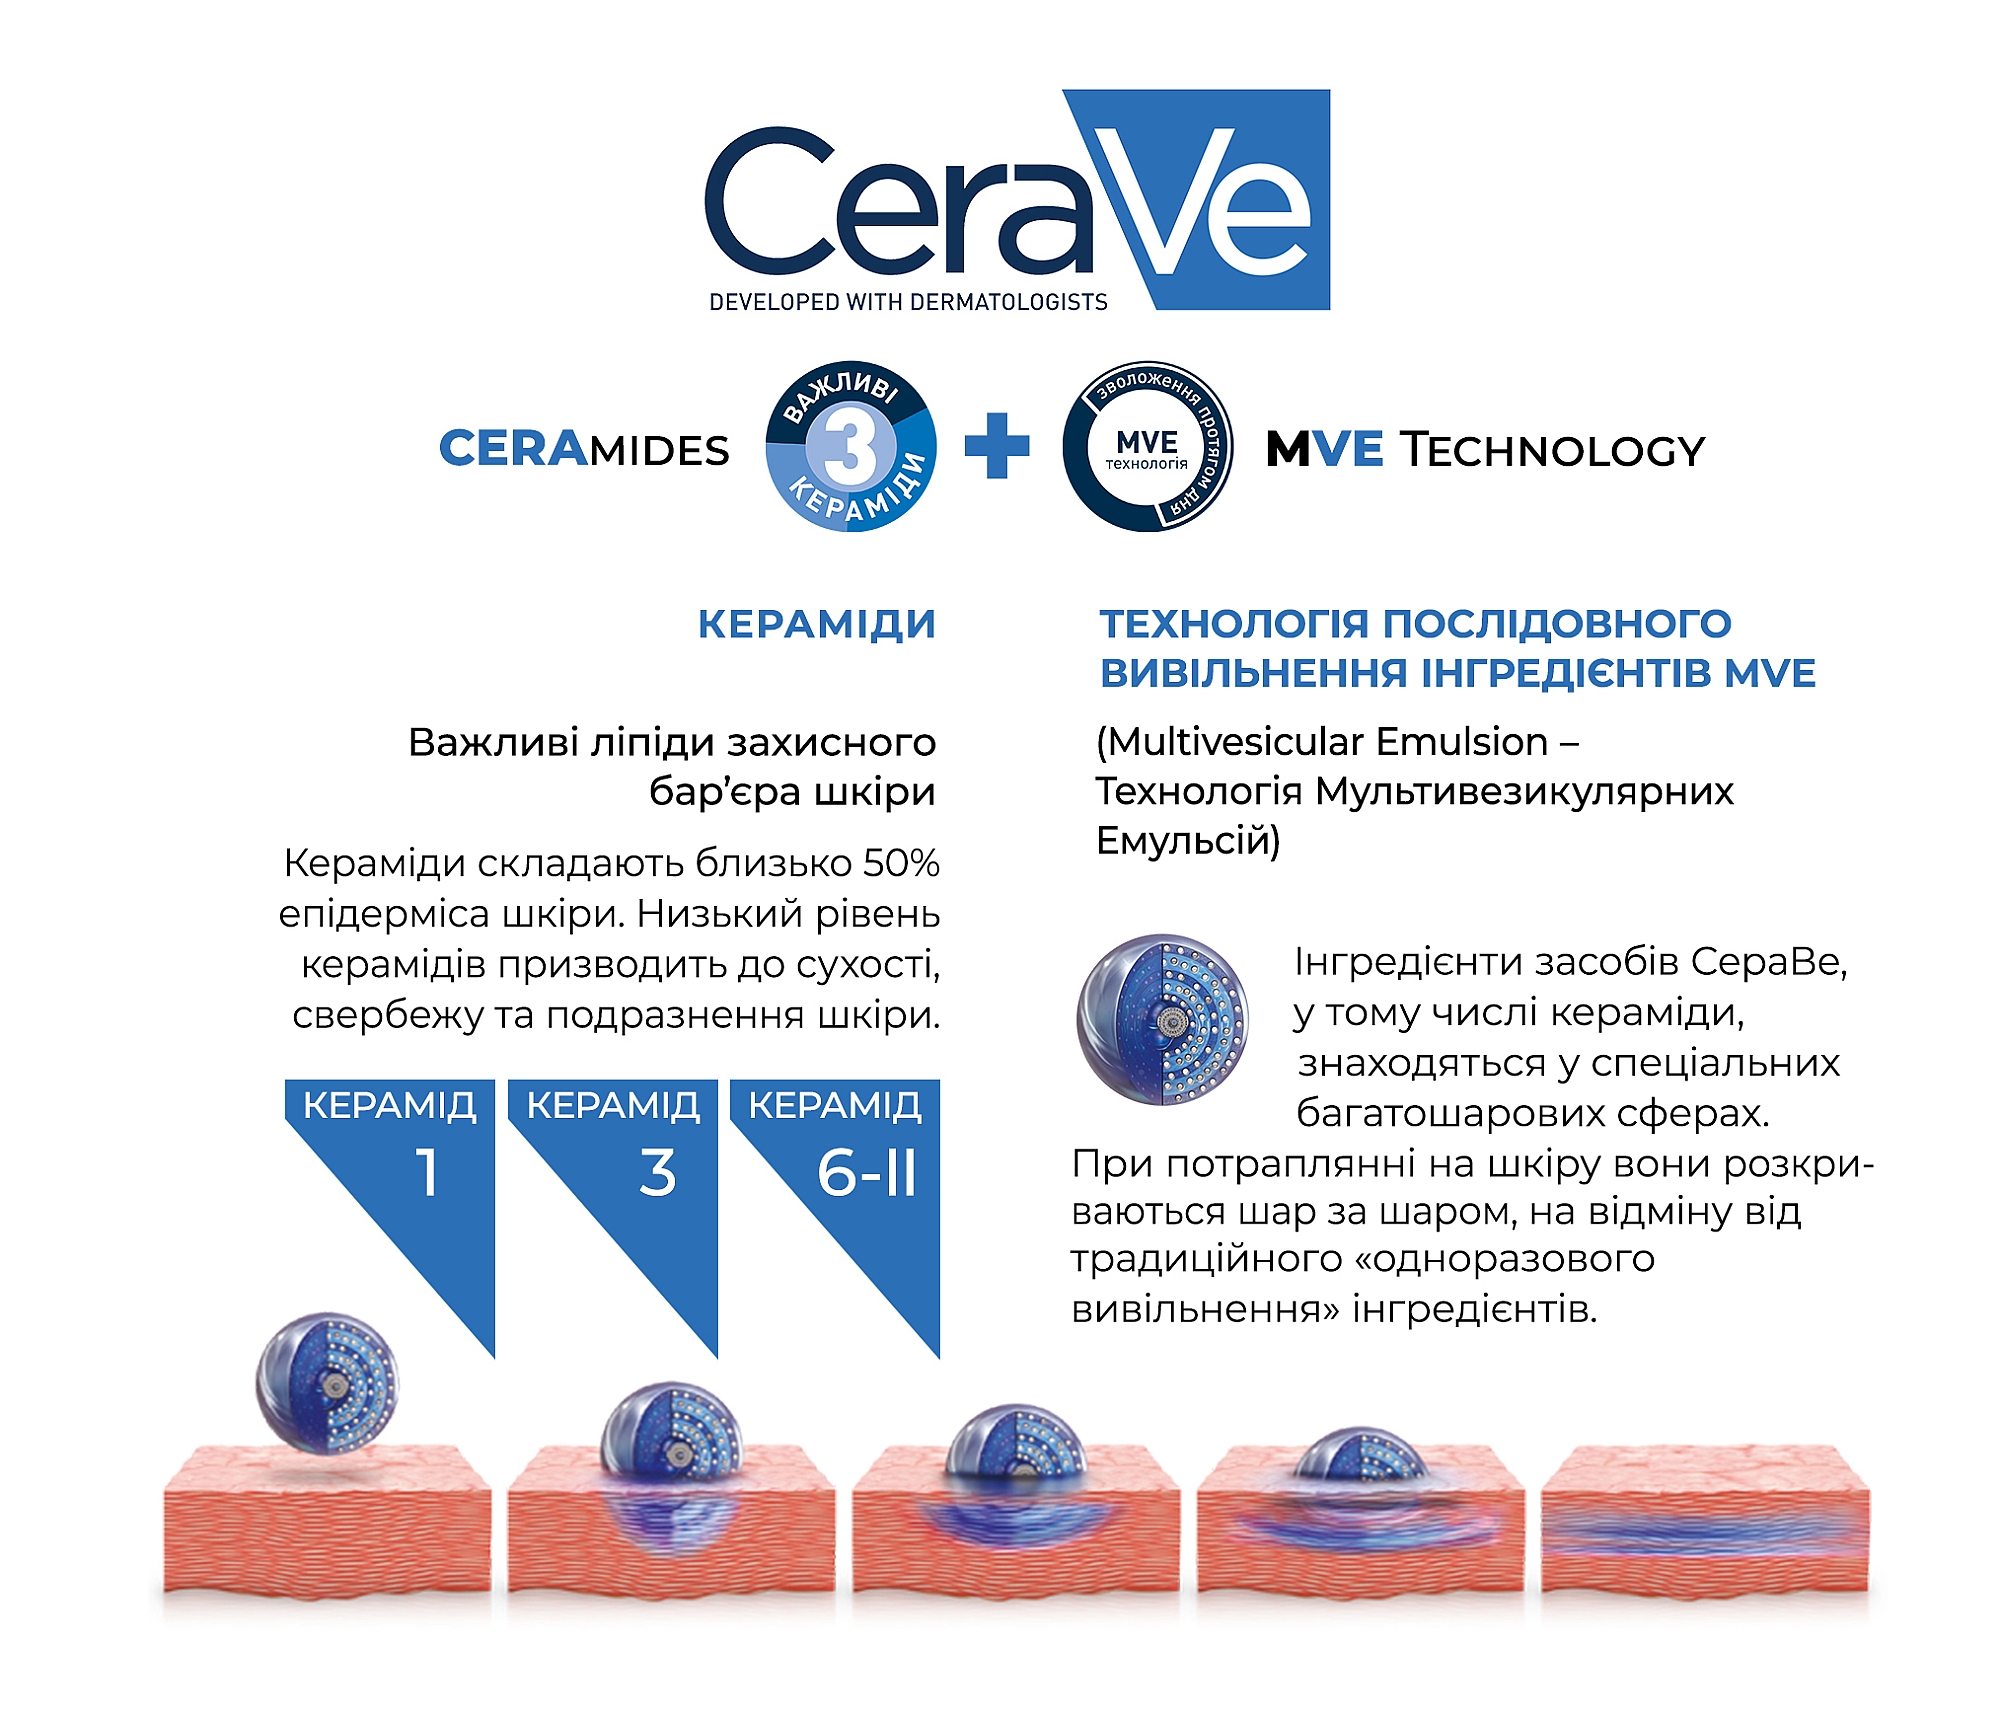 CeraVe Micellar Cleansing Water